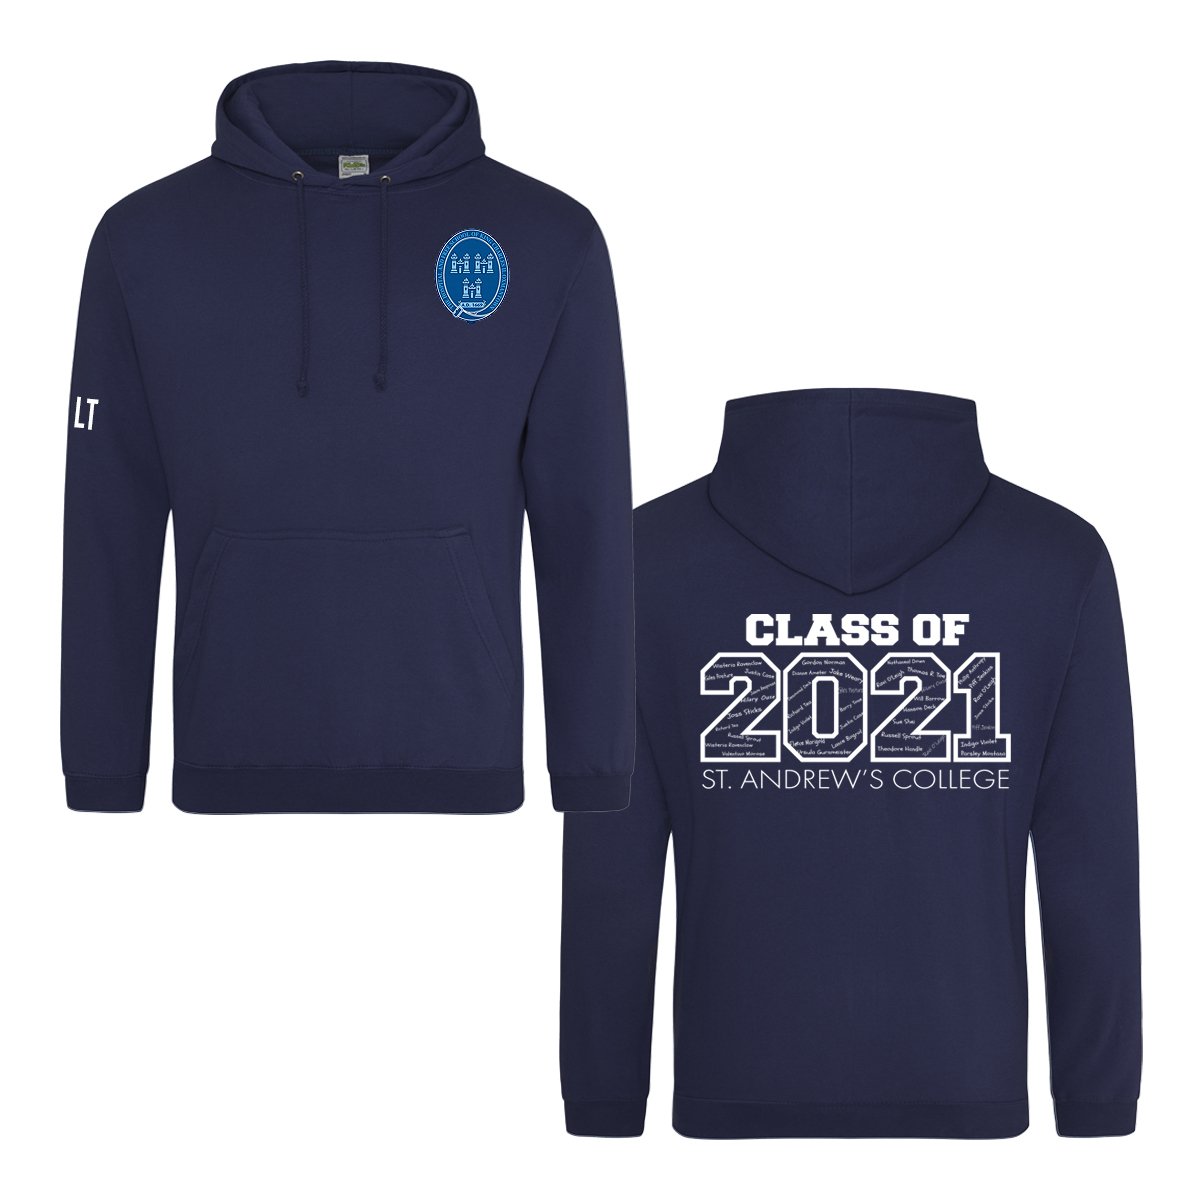 Class of 2021 Hoodies, Design your own Class of 2021 Hoody at Uniformity